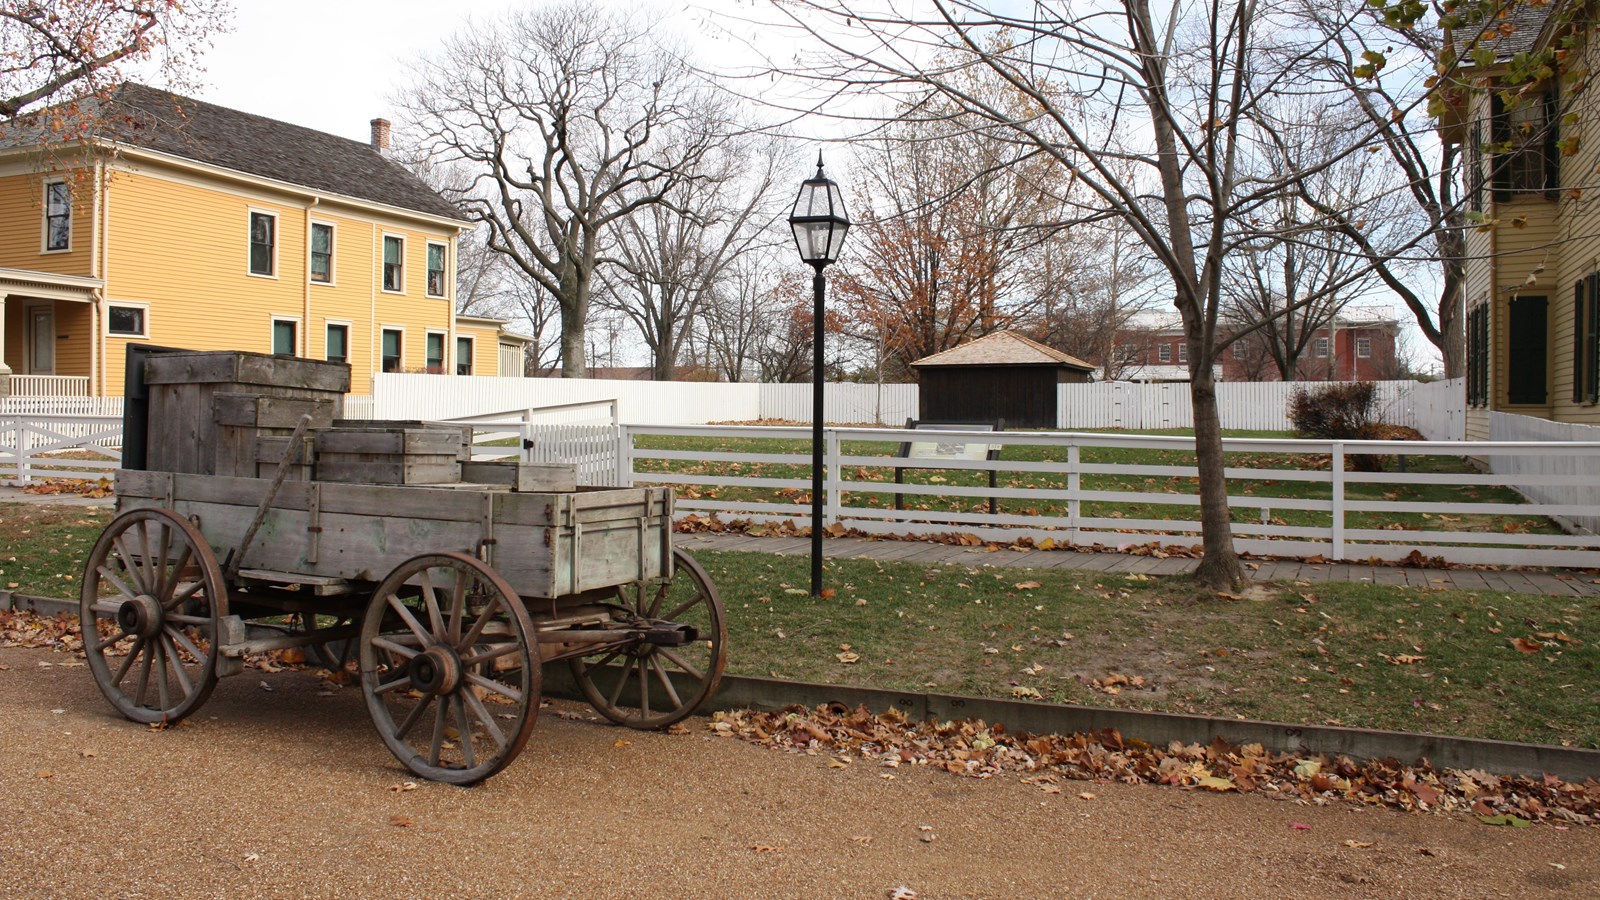 Empty grass lot surrounded by white fence with old wooden wagon/cart in front on street